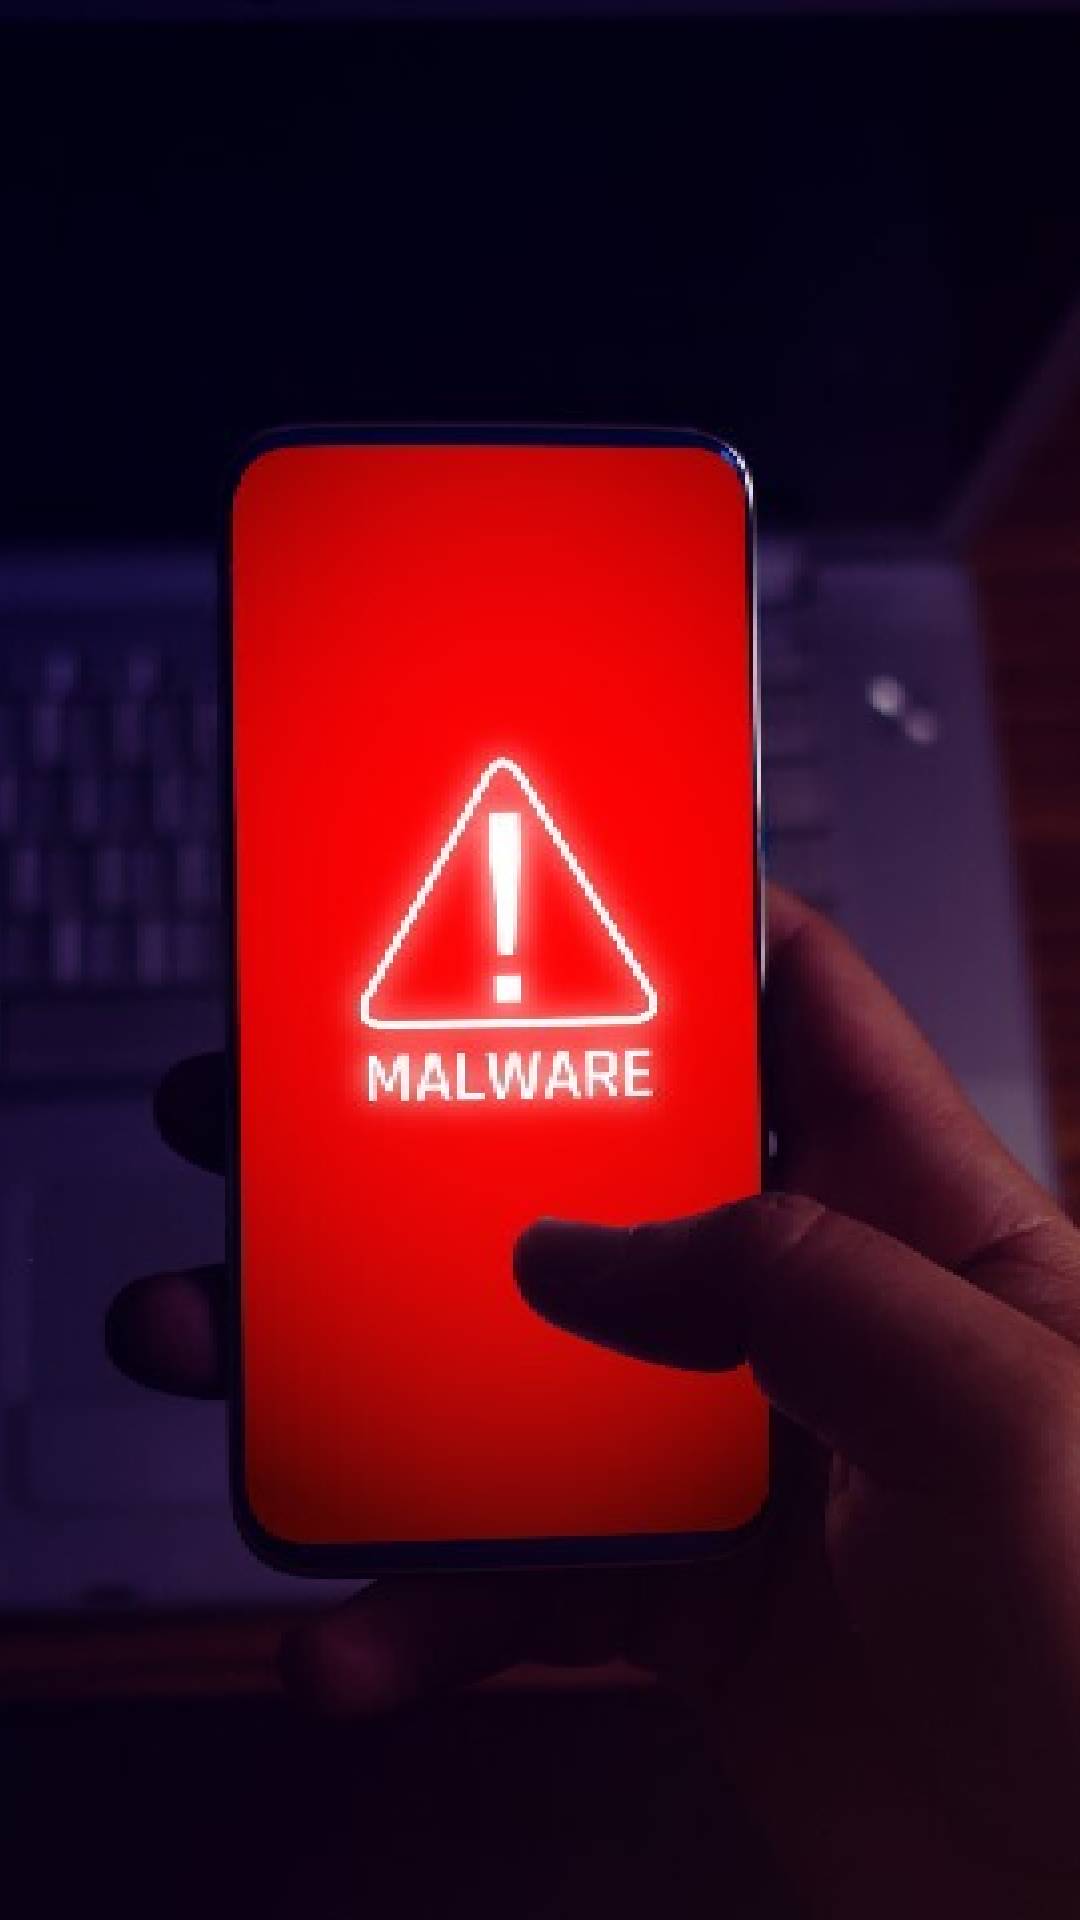 7 signs a smartphone has been infected with malware